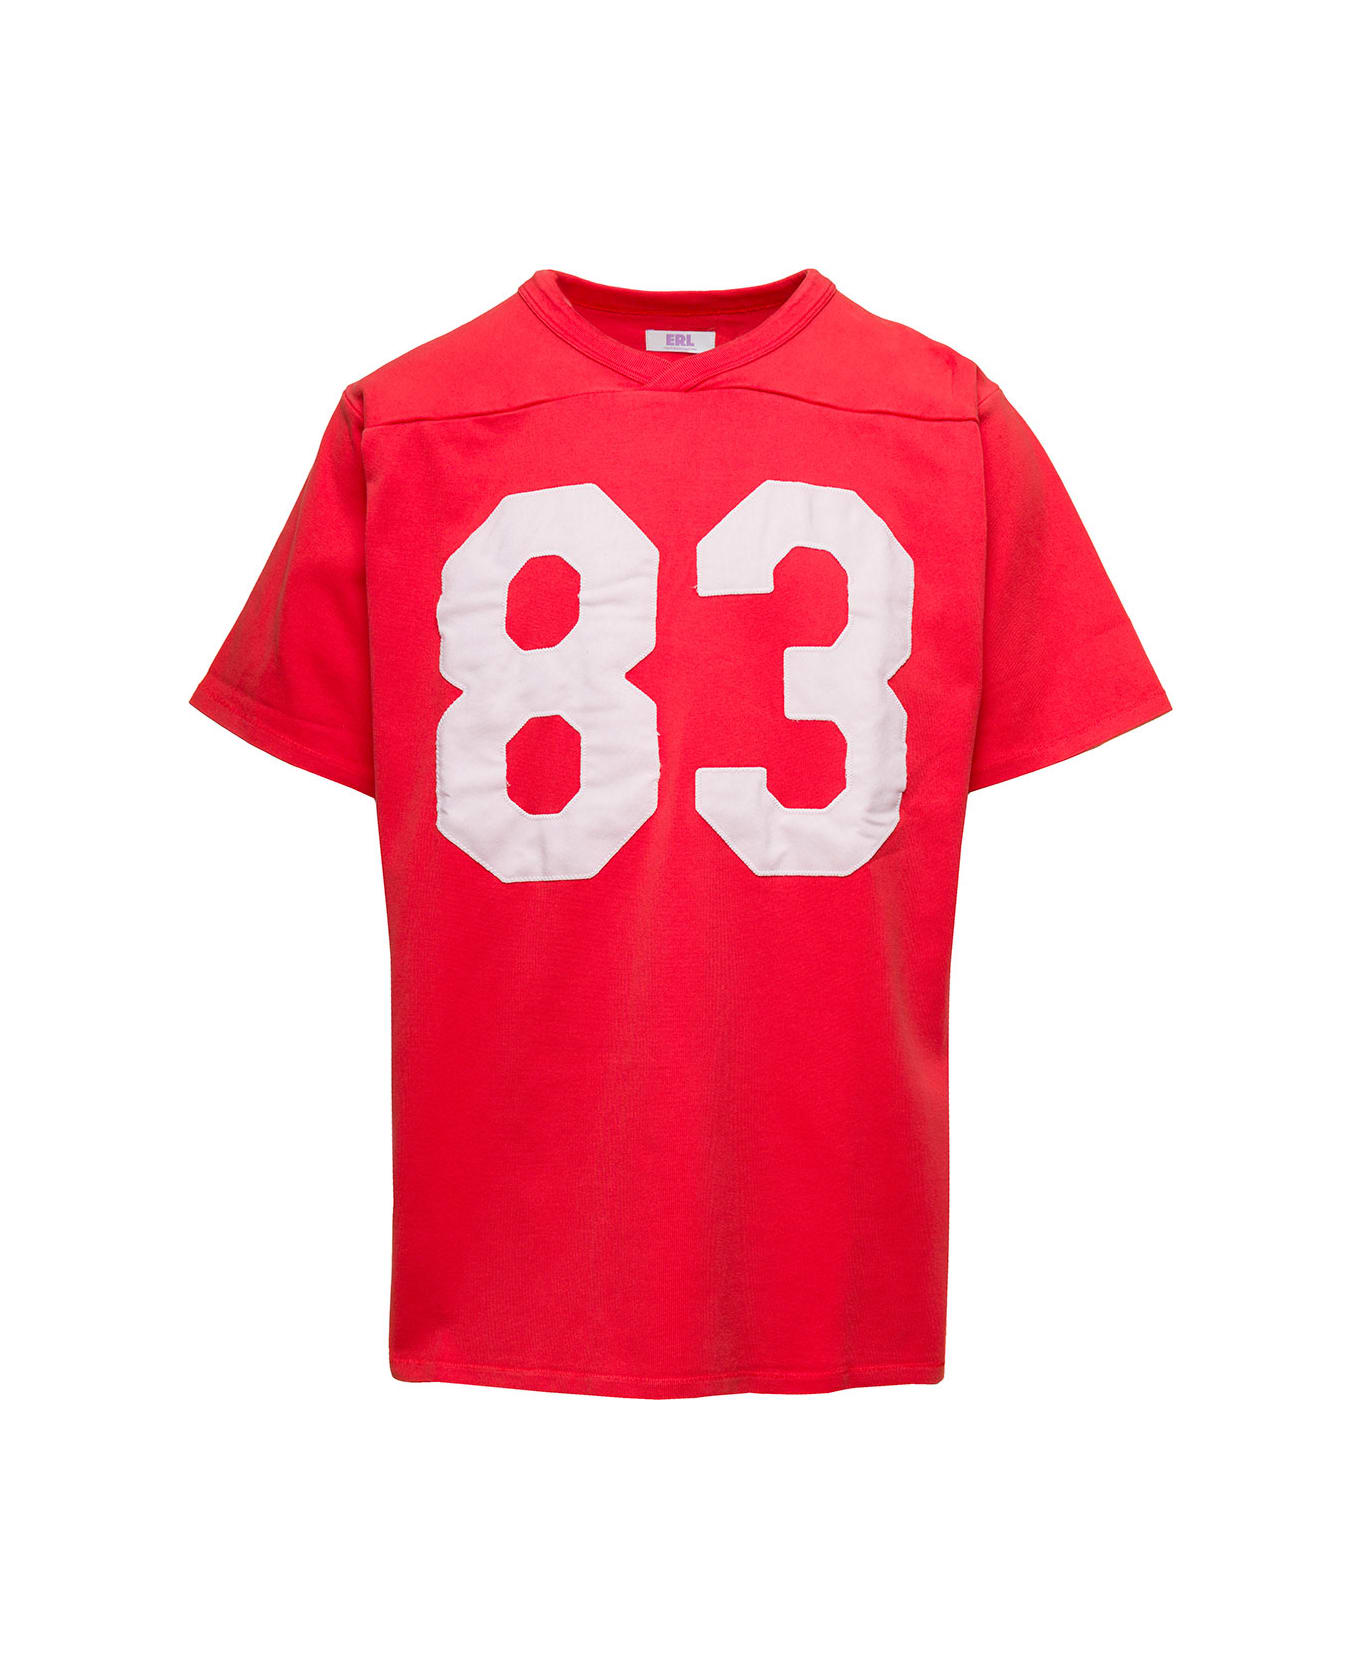 ERL Red Football T-shirt With 83 Print In Cotton - Red シャツ